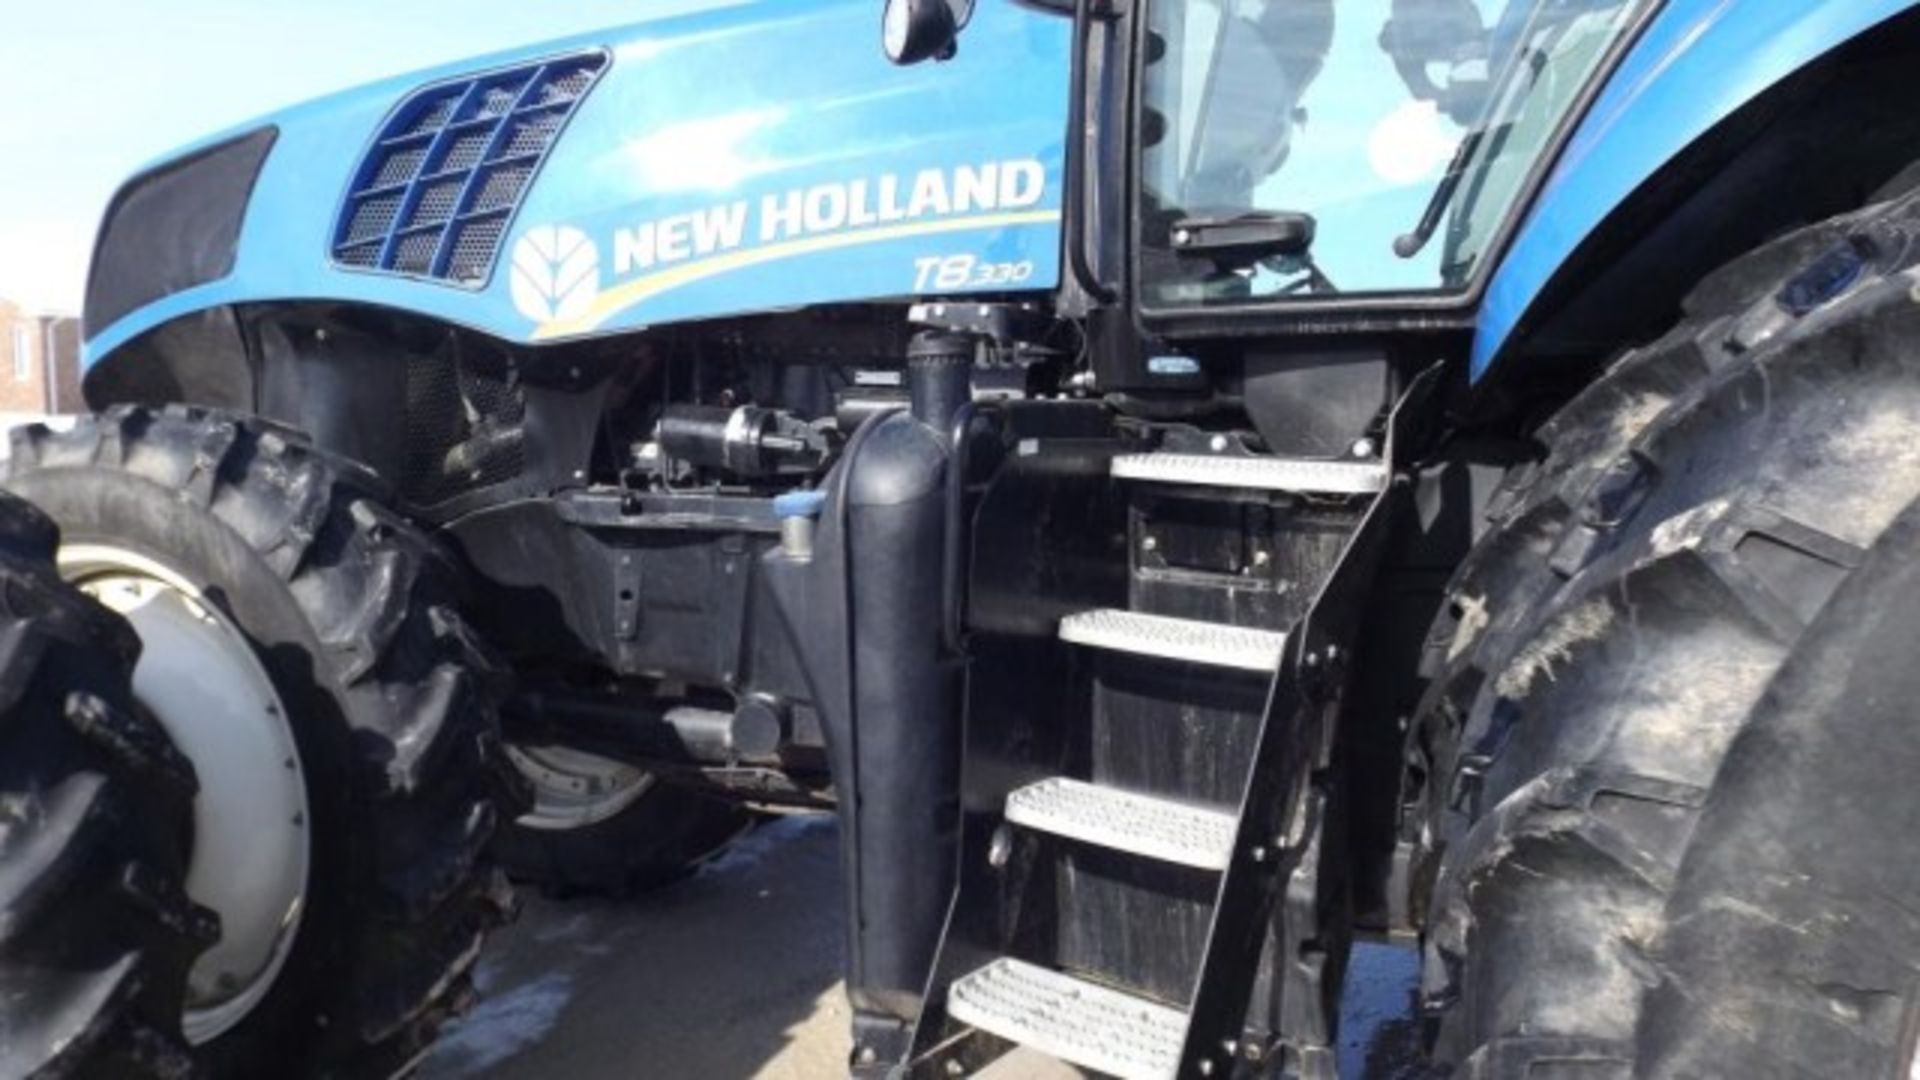 New Holland T8.330 Tractor '12, sn#ZBRC08592 1192 Hrs, MFWD, Deluxe Cab, Buddy Seat, 280 HP, 18/4 - Image 9 of 19